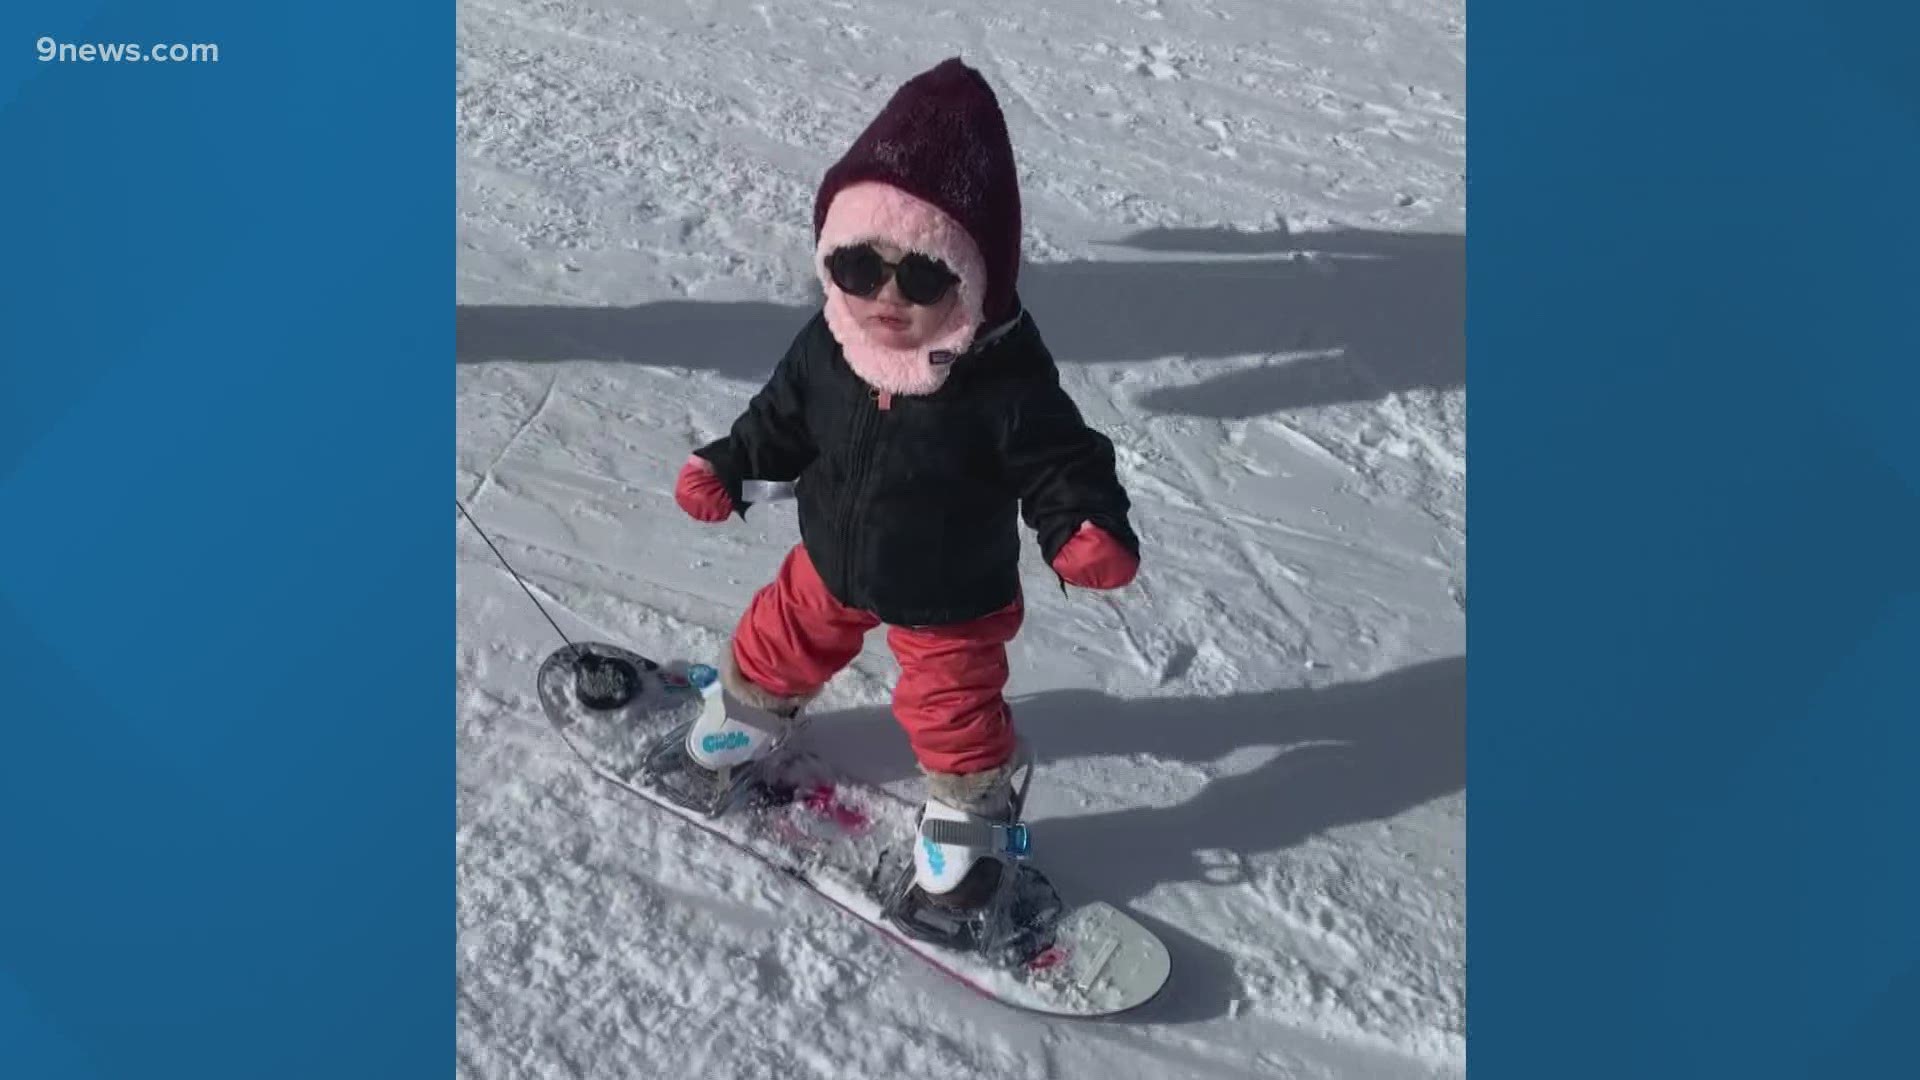 Mom Victoria Hock said this was Rosalie's first time snowboarding. The video was taken at Monarch.